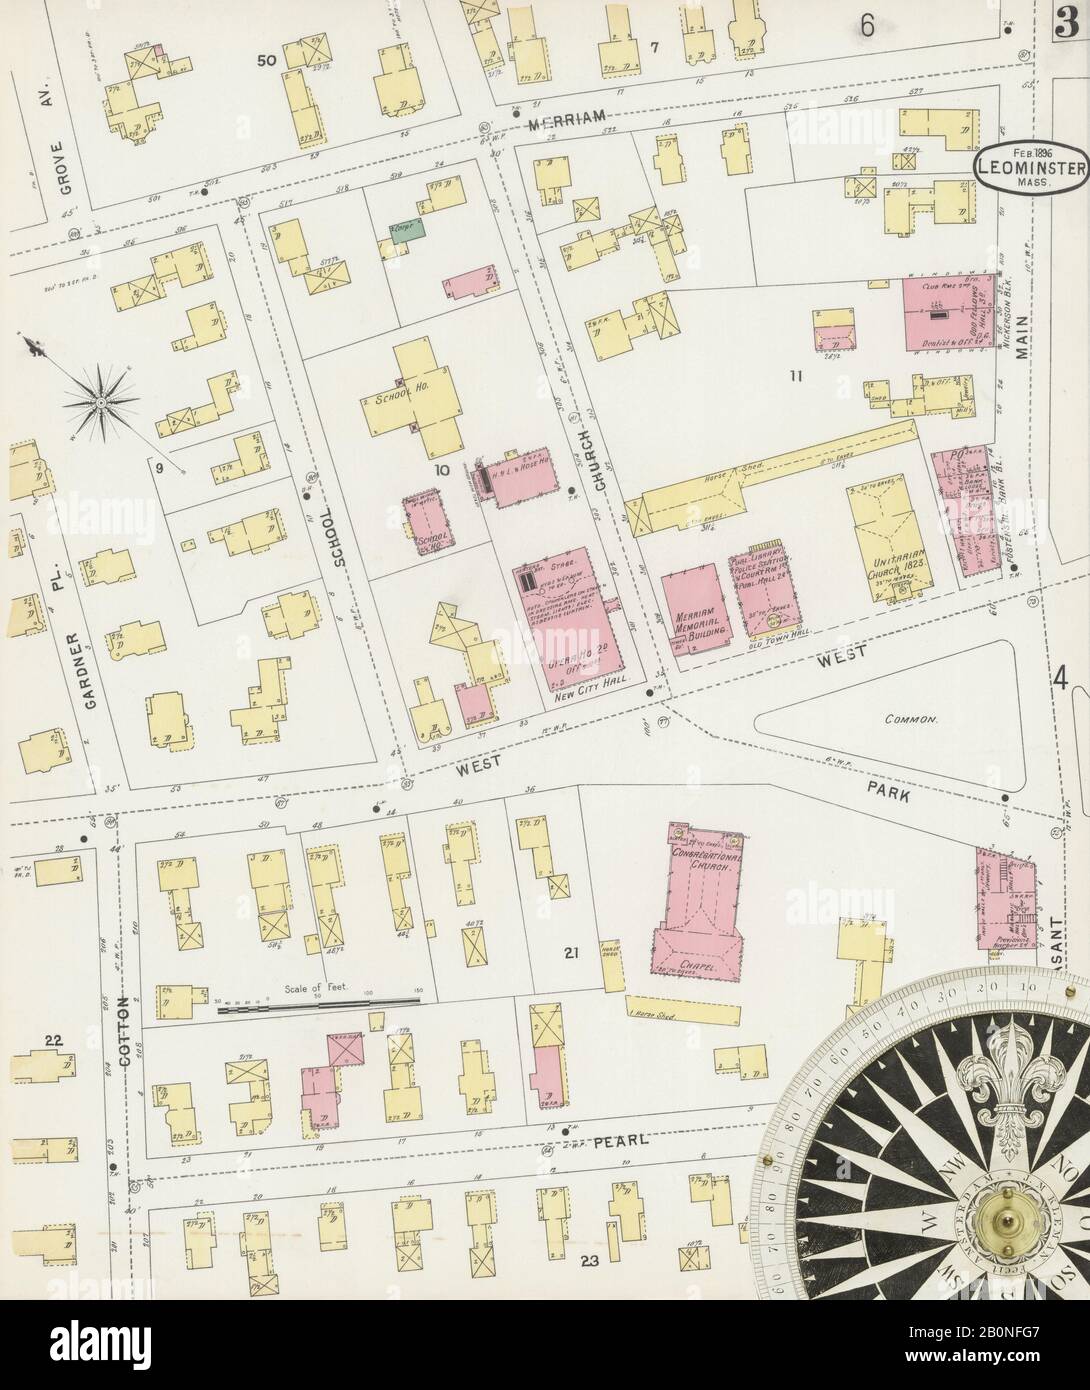 Image 3 of Sanborn Fire Insurance Map from Leominster, Worcester County, Massachusetts. Feb 1896. 11 Sheet(s), America, street map with a Nineteenth Century compass Stock Photo